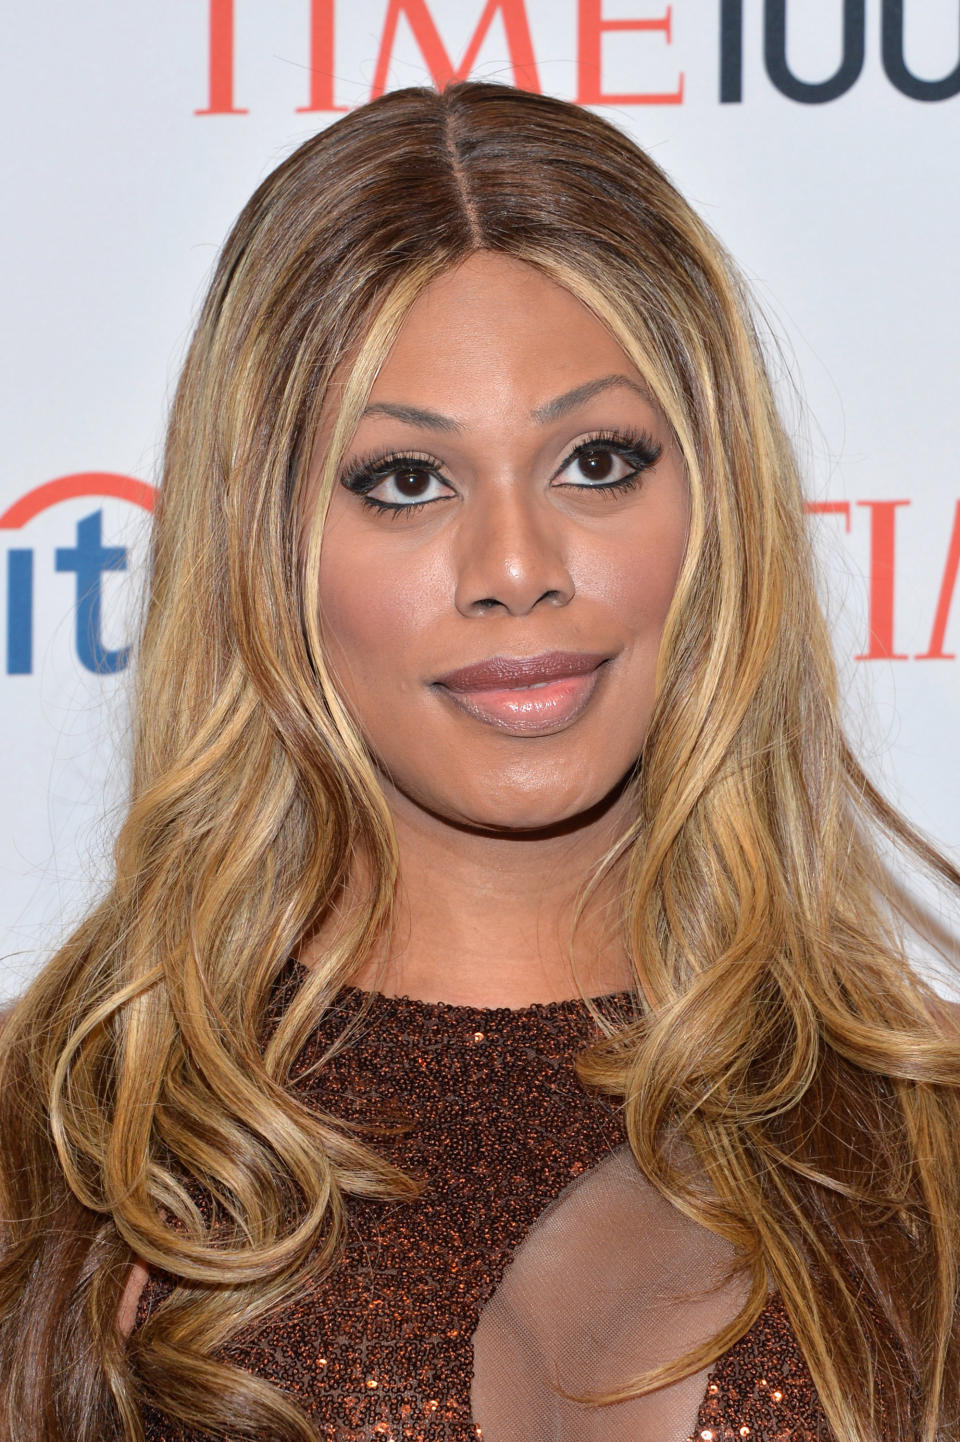 NEW YORK, NY - APRIL 29:  Actress Laverne Cox attends the TIME 100 Gala, TIME's 100 most influential people in the world, at Jazz at Lincoln Center on April 29, 2014 in New York City.  (Photo by Ben Gabbe/Getty Images for TIME)